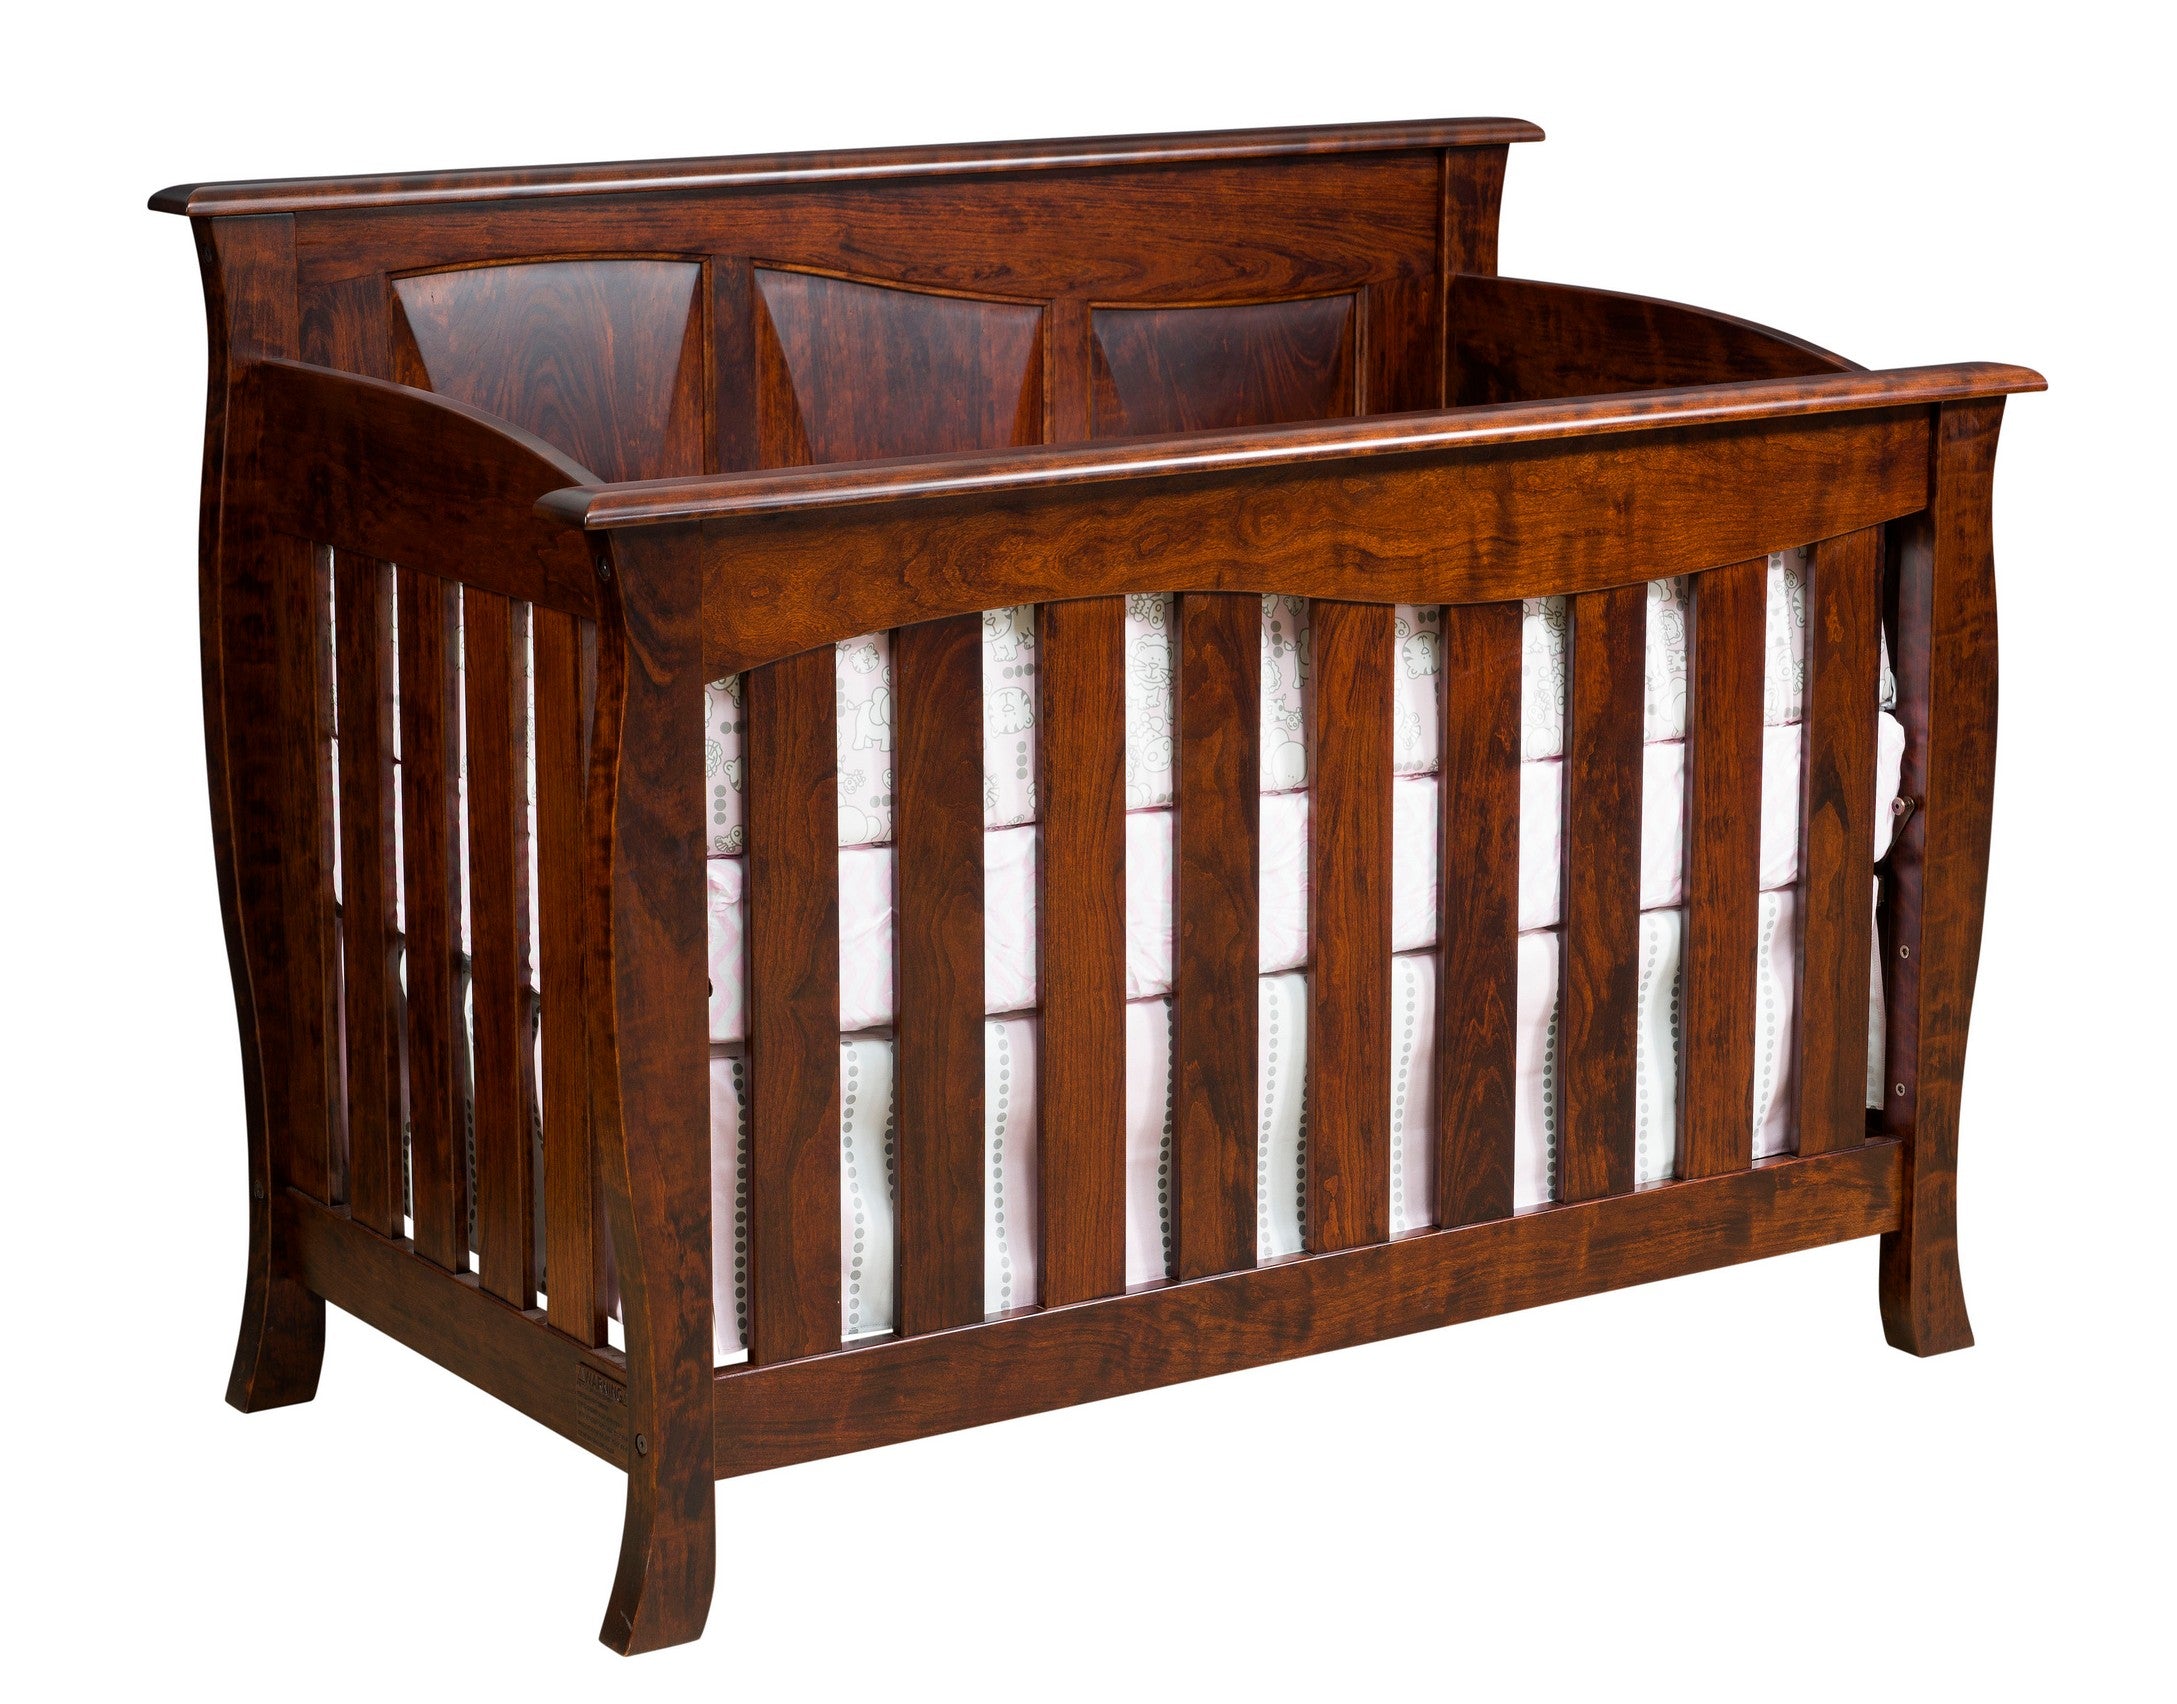 cayman crib in sap cherry wood with burnt umber stain